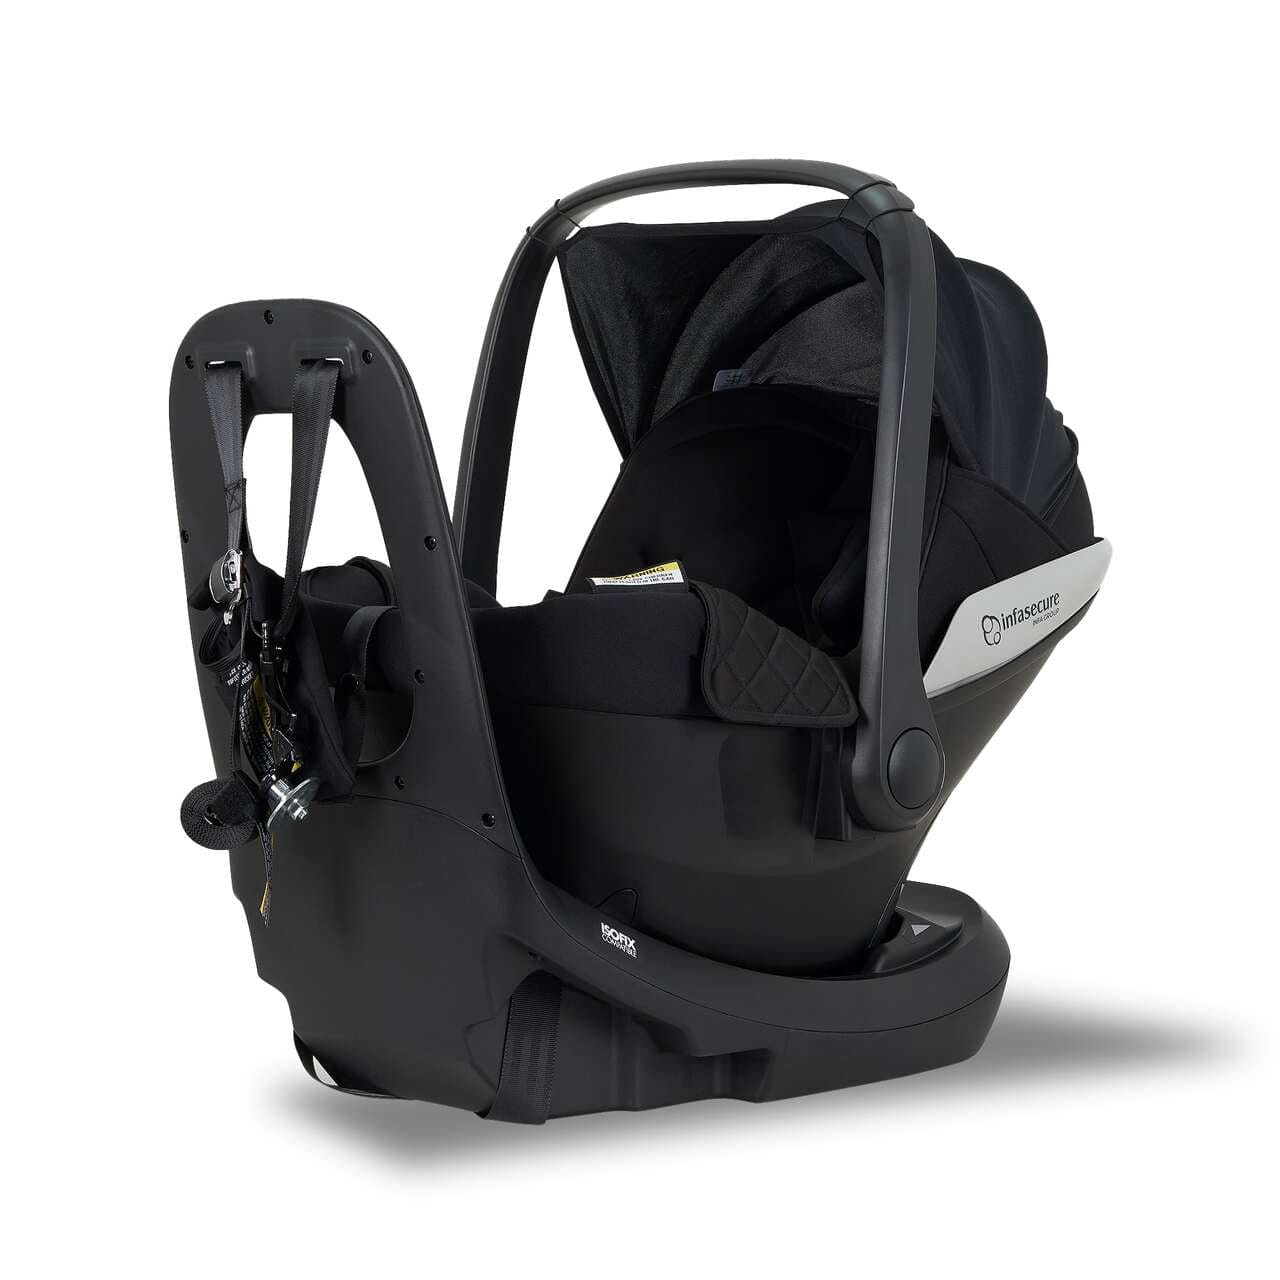 Adapt More - ISOFix (Birth to 6 Months) – Infa Group